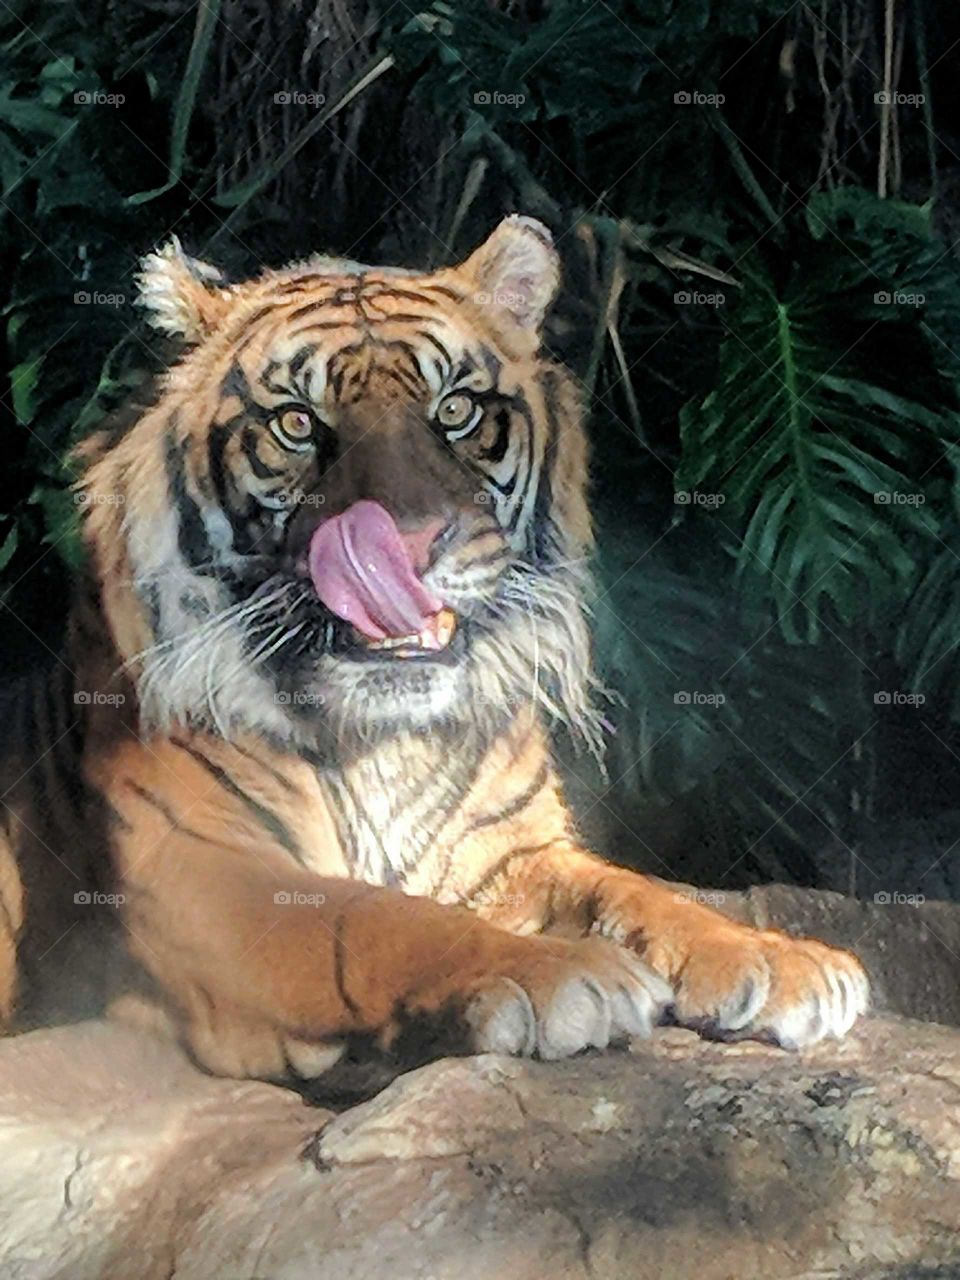 Hungry Tiger licking chops